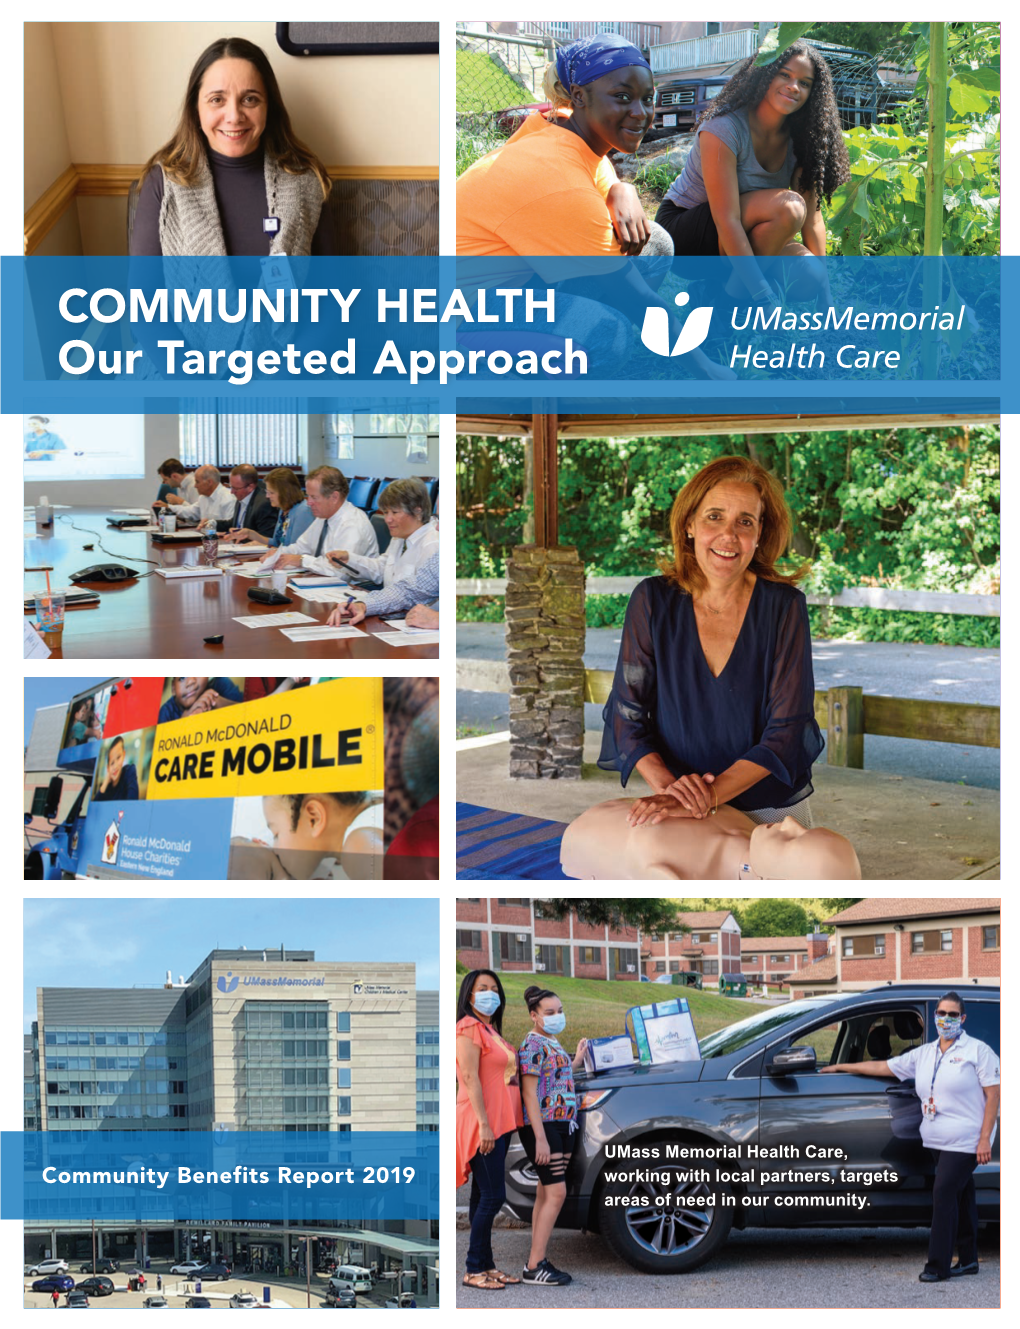 COMMUNITY HEALTH Our Targeted Approach